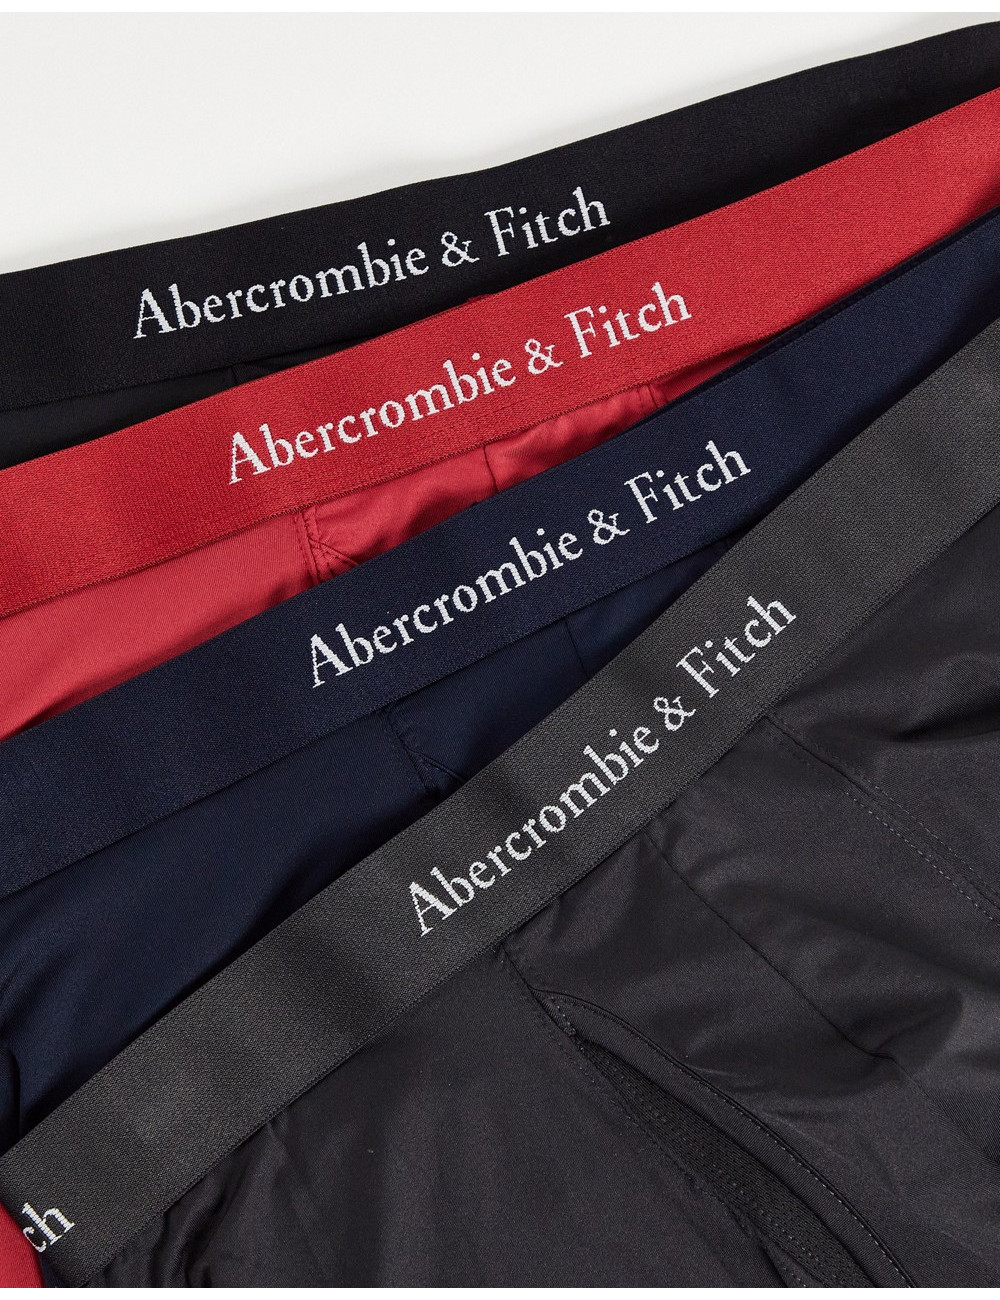 Abercrombie & Fitch 4 pack...